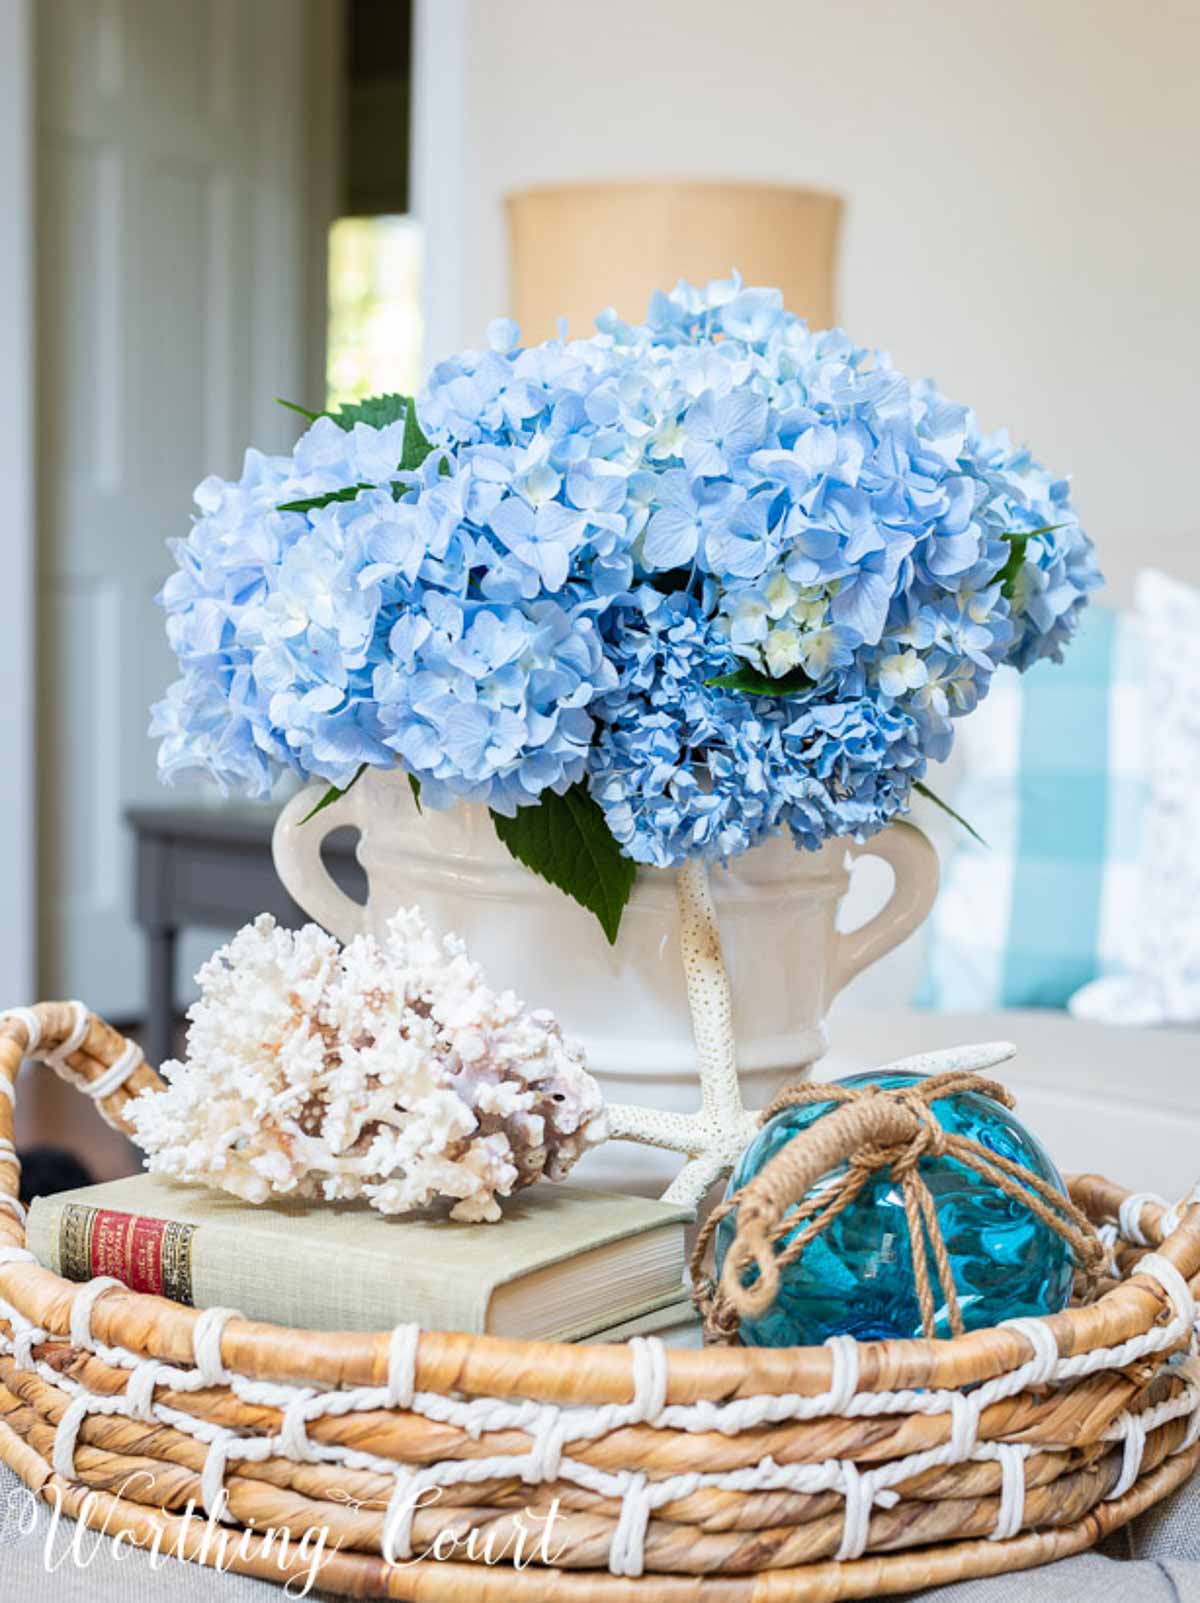 bunch of blue hydrangeas arranged in a white vase and displayed in a round wicker basket with a blue float and piece of white coral on top of a book